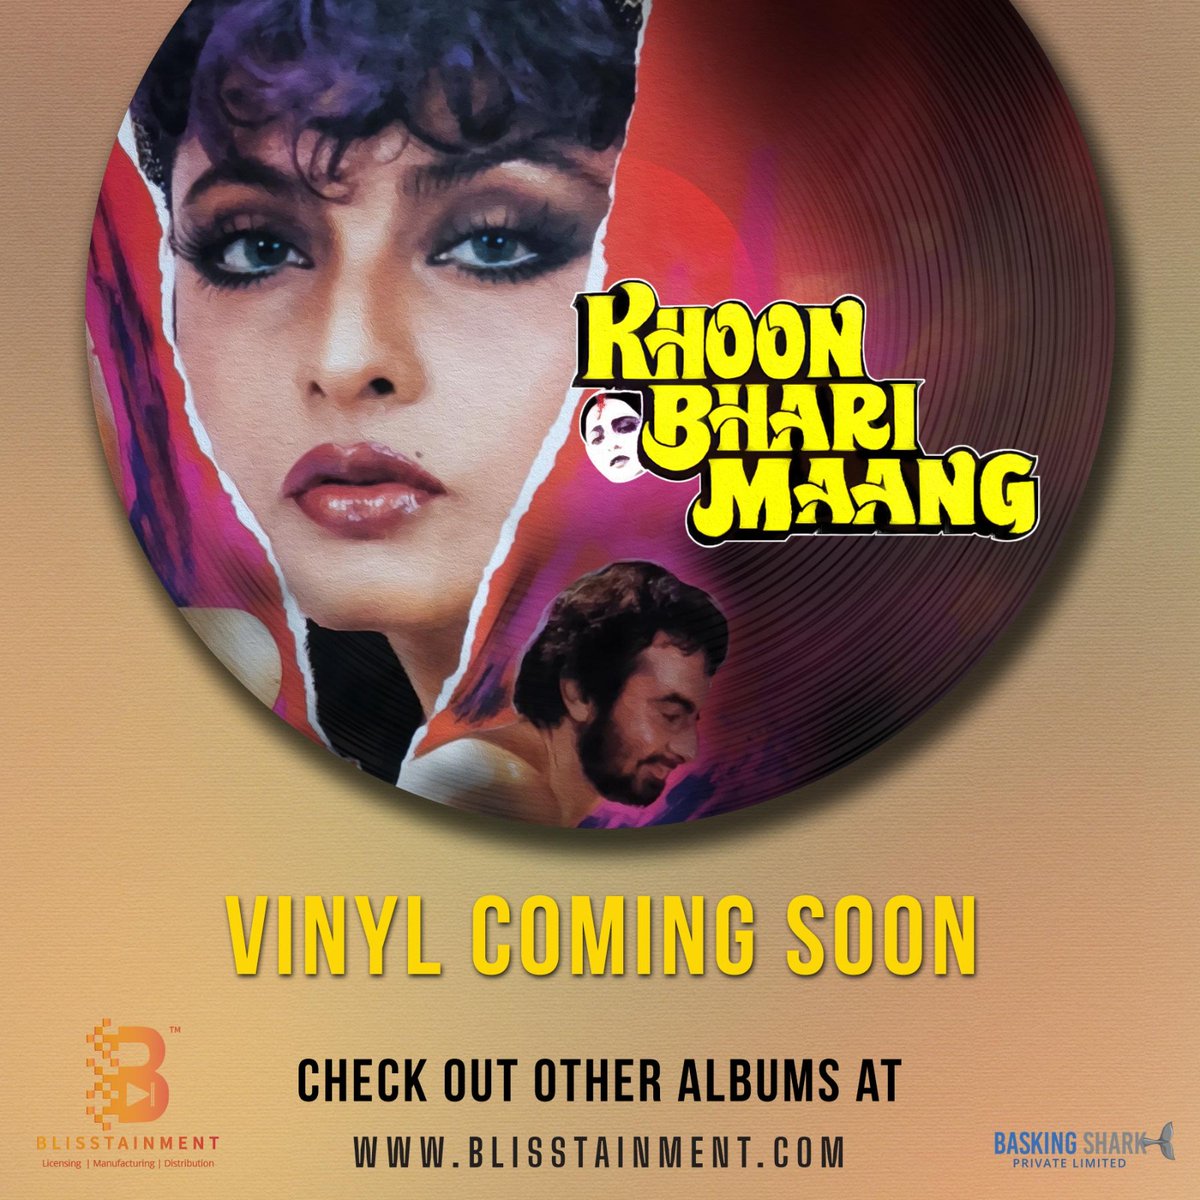 Relive the magic of #Bollywoodclassic, #KhoonBhariMaang! Starring #Rekha in a powerful role, this film has become an iconic part of #Bollywoodhistory. #ComingSoon on #Blisstainment.
#IndianCinema #HindiFilm #MovieNight #FilmLovers #OldIsGold #Throwback #Nostalgia #VintageCinema